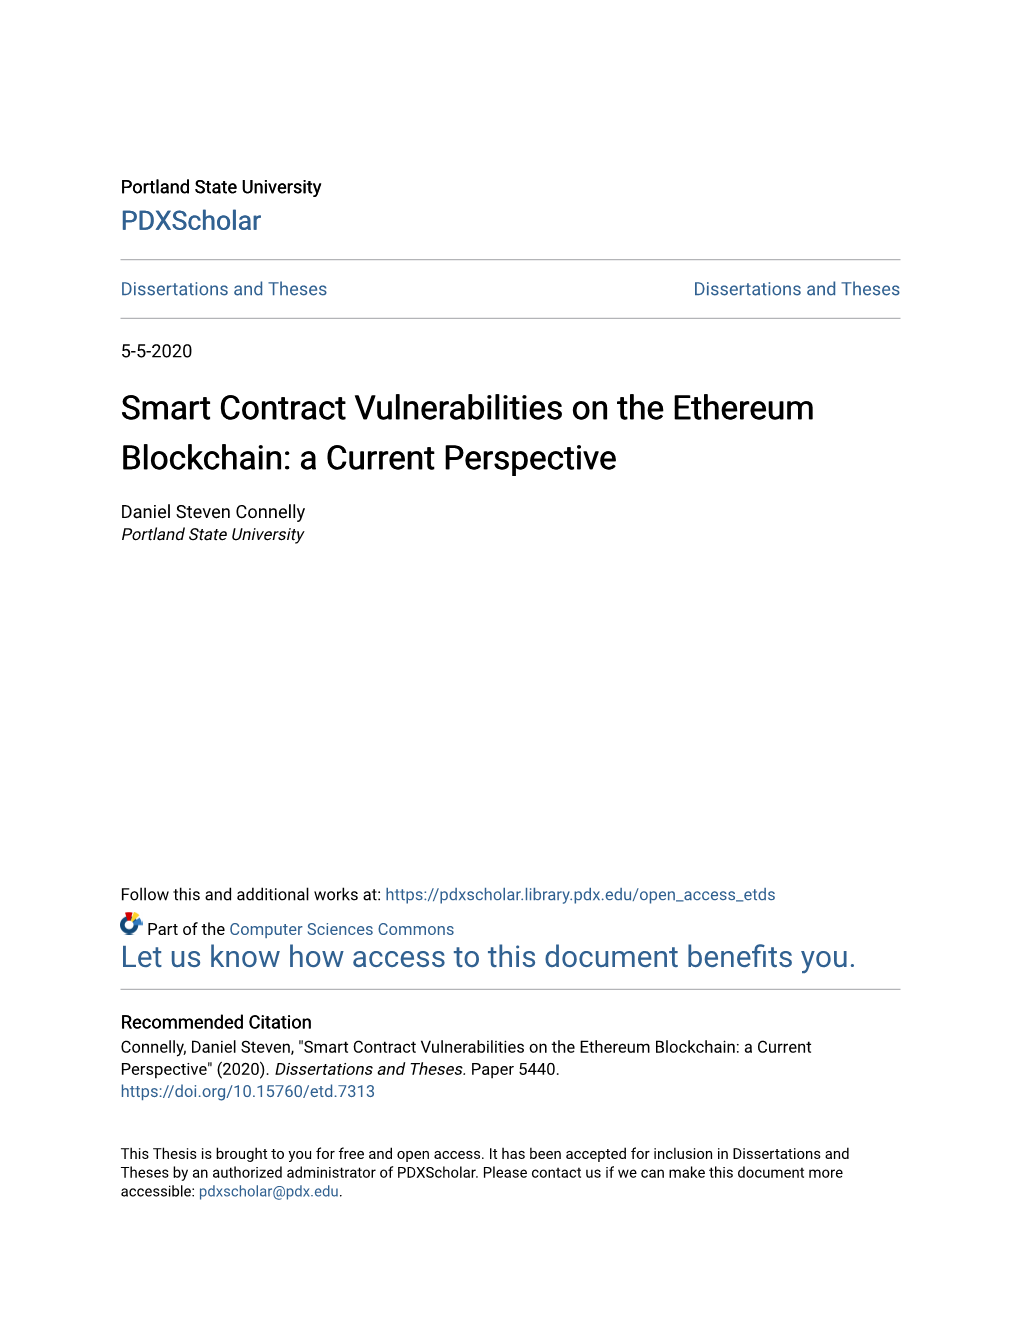 Smart Contract Vulnerabilities on the Ethereum Blockchain: a Current Perspective